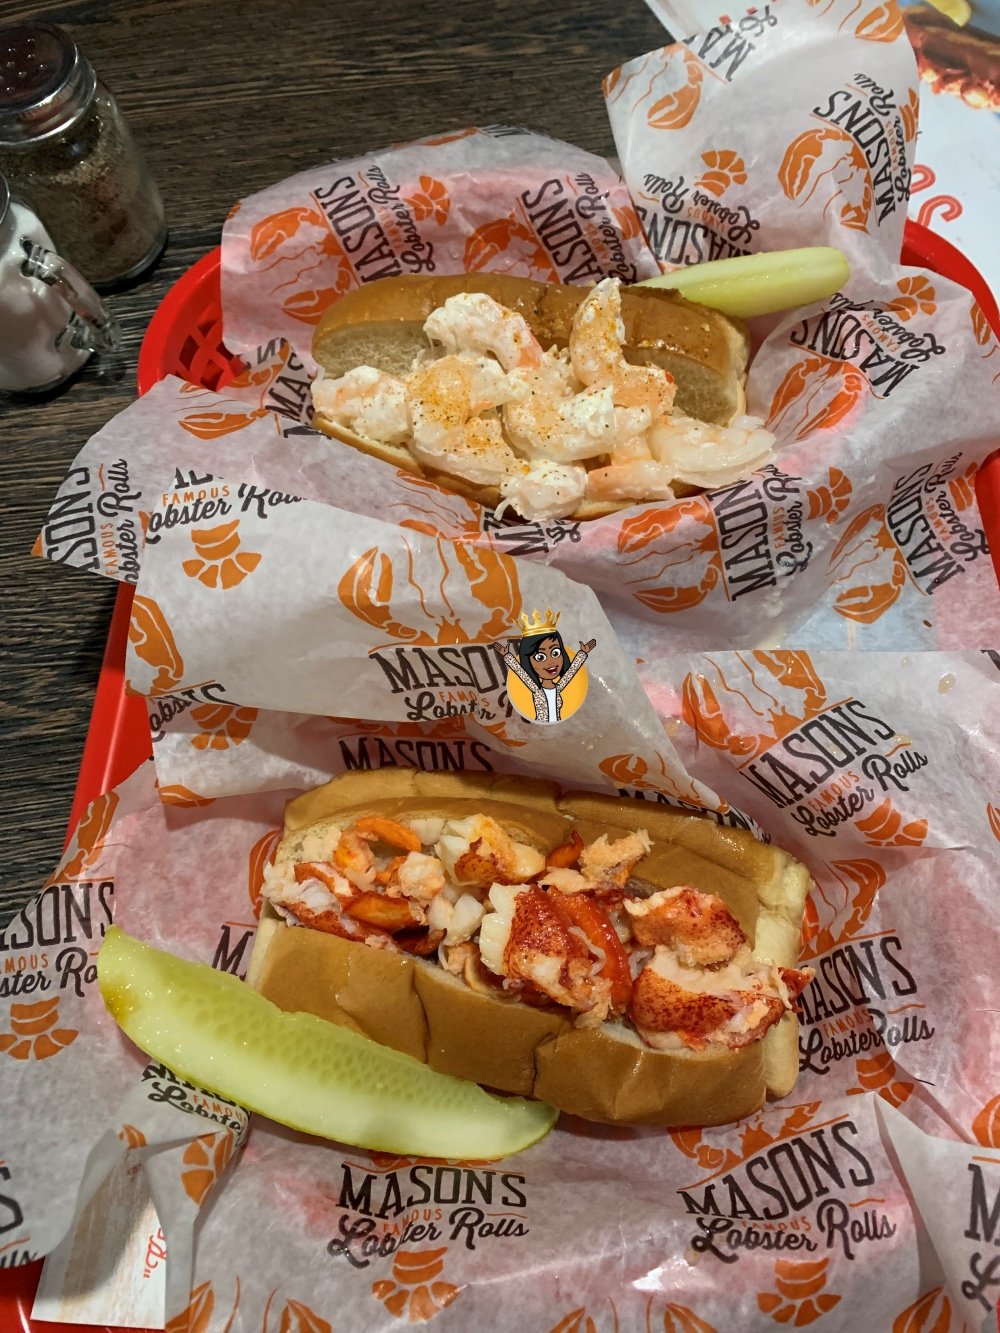 Shrimp Roll and Connecticut Roll